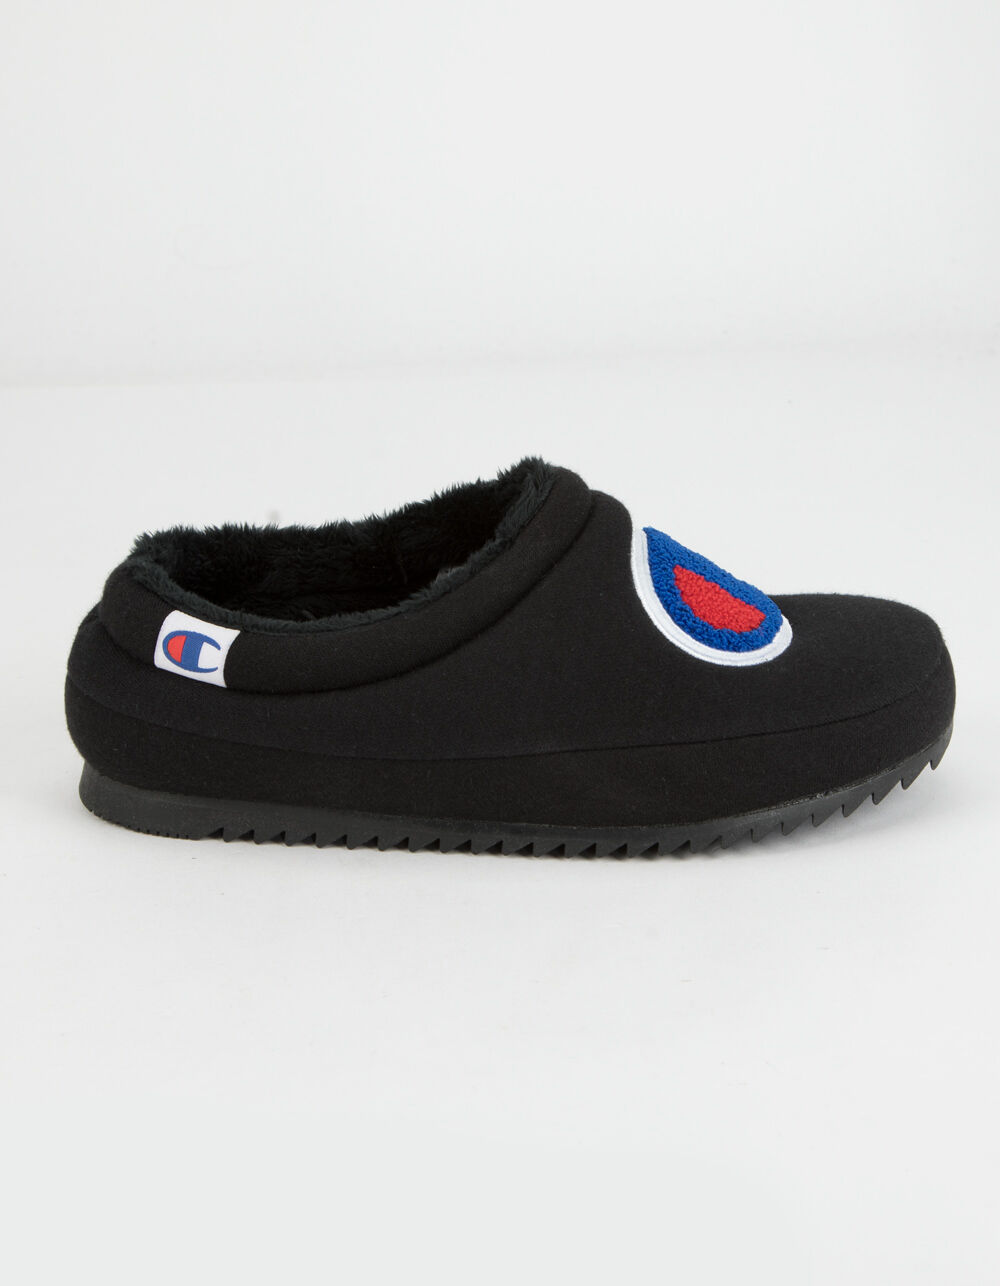 CHAMPION Shuffle Boys Slippers image number 0